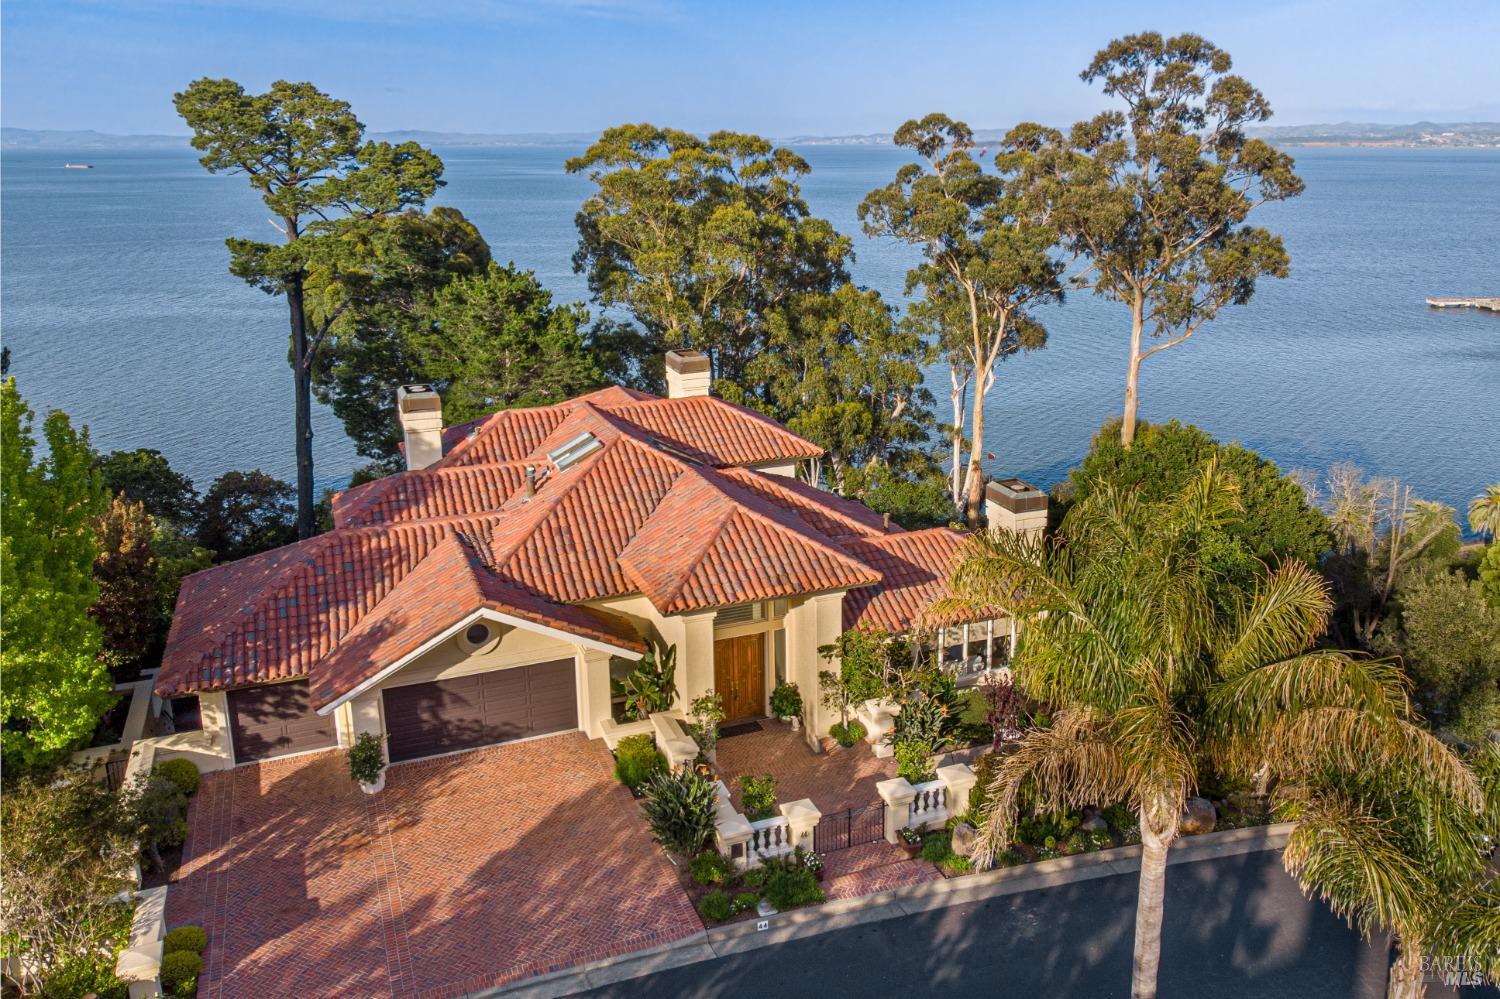 HUGE REDUCTION! As you enter 44 Marin Bay Court, be carried away to the finest seaside European Villa! Breathtaking bayfront vistas surrounded by gardens and natural habitat are the private setting for the 5 bedroom, 5 bath 5560 square foot residence. Fine building and sense of scale are seen in the soaring ceilings, wonderful natural light, deep moldings, elegant hardwoods and marble floors. The current owner has enhanced the home with custom design elements inside and out: curated lighting, remodeled kitchen, custom window coverings, hot tub, fire pit, outdoor BBQ, the list goes on. The main level is ideal for entertaining, featuring formal and informal rooms plus remodeled chef's kitchen, all flow to outside terrace for dining alfresco. The spacious primary suite is a romantic private oasis. The wood paneled library, media room and guest rooms-ensuite with private baths also feature terrace access to the spa overlooking the sea. Experience the timeless elegance and exceptional craftsmanship at this unparalleled estate.